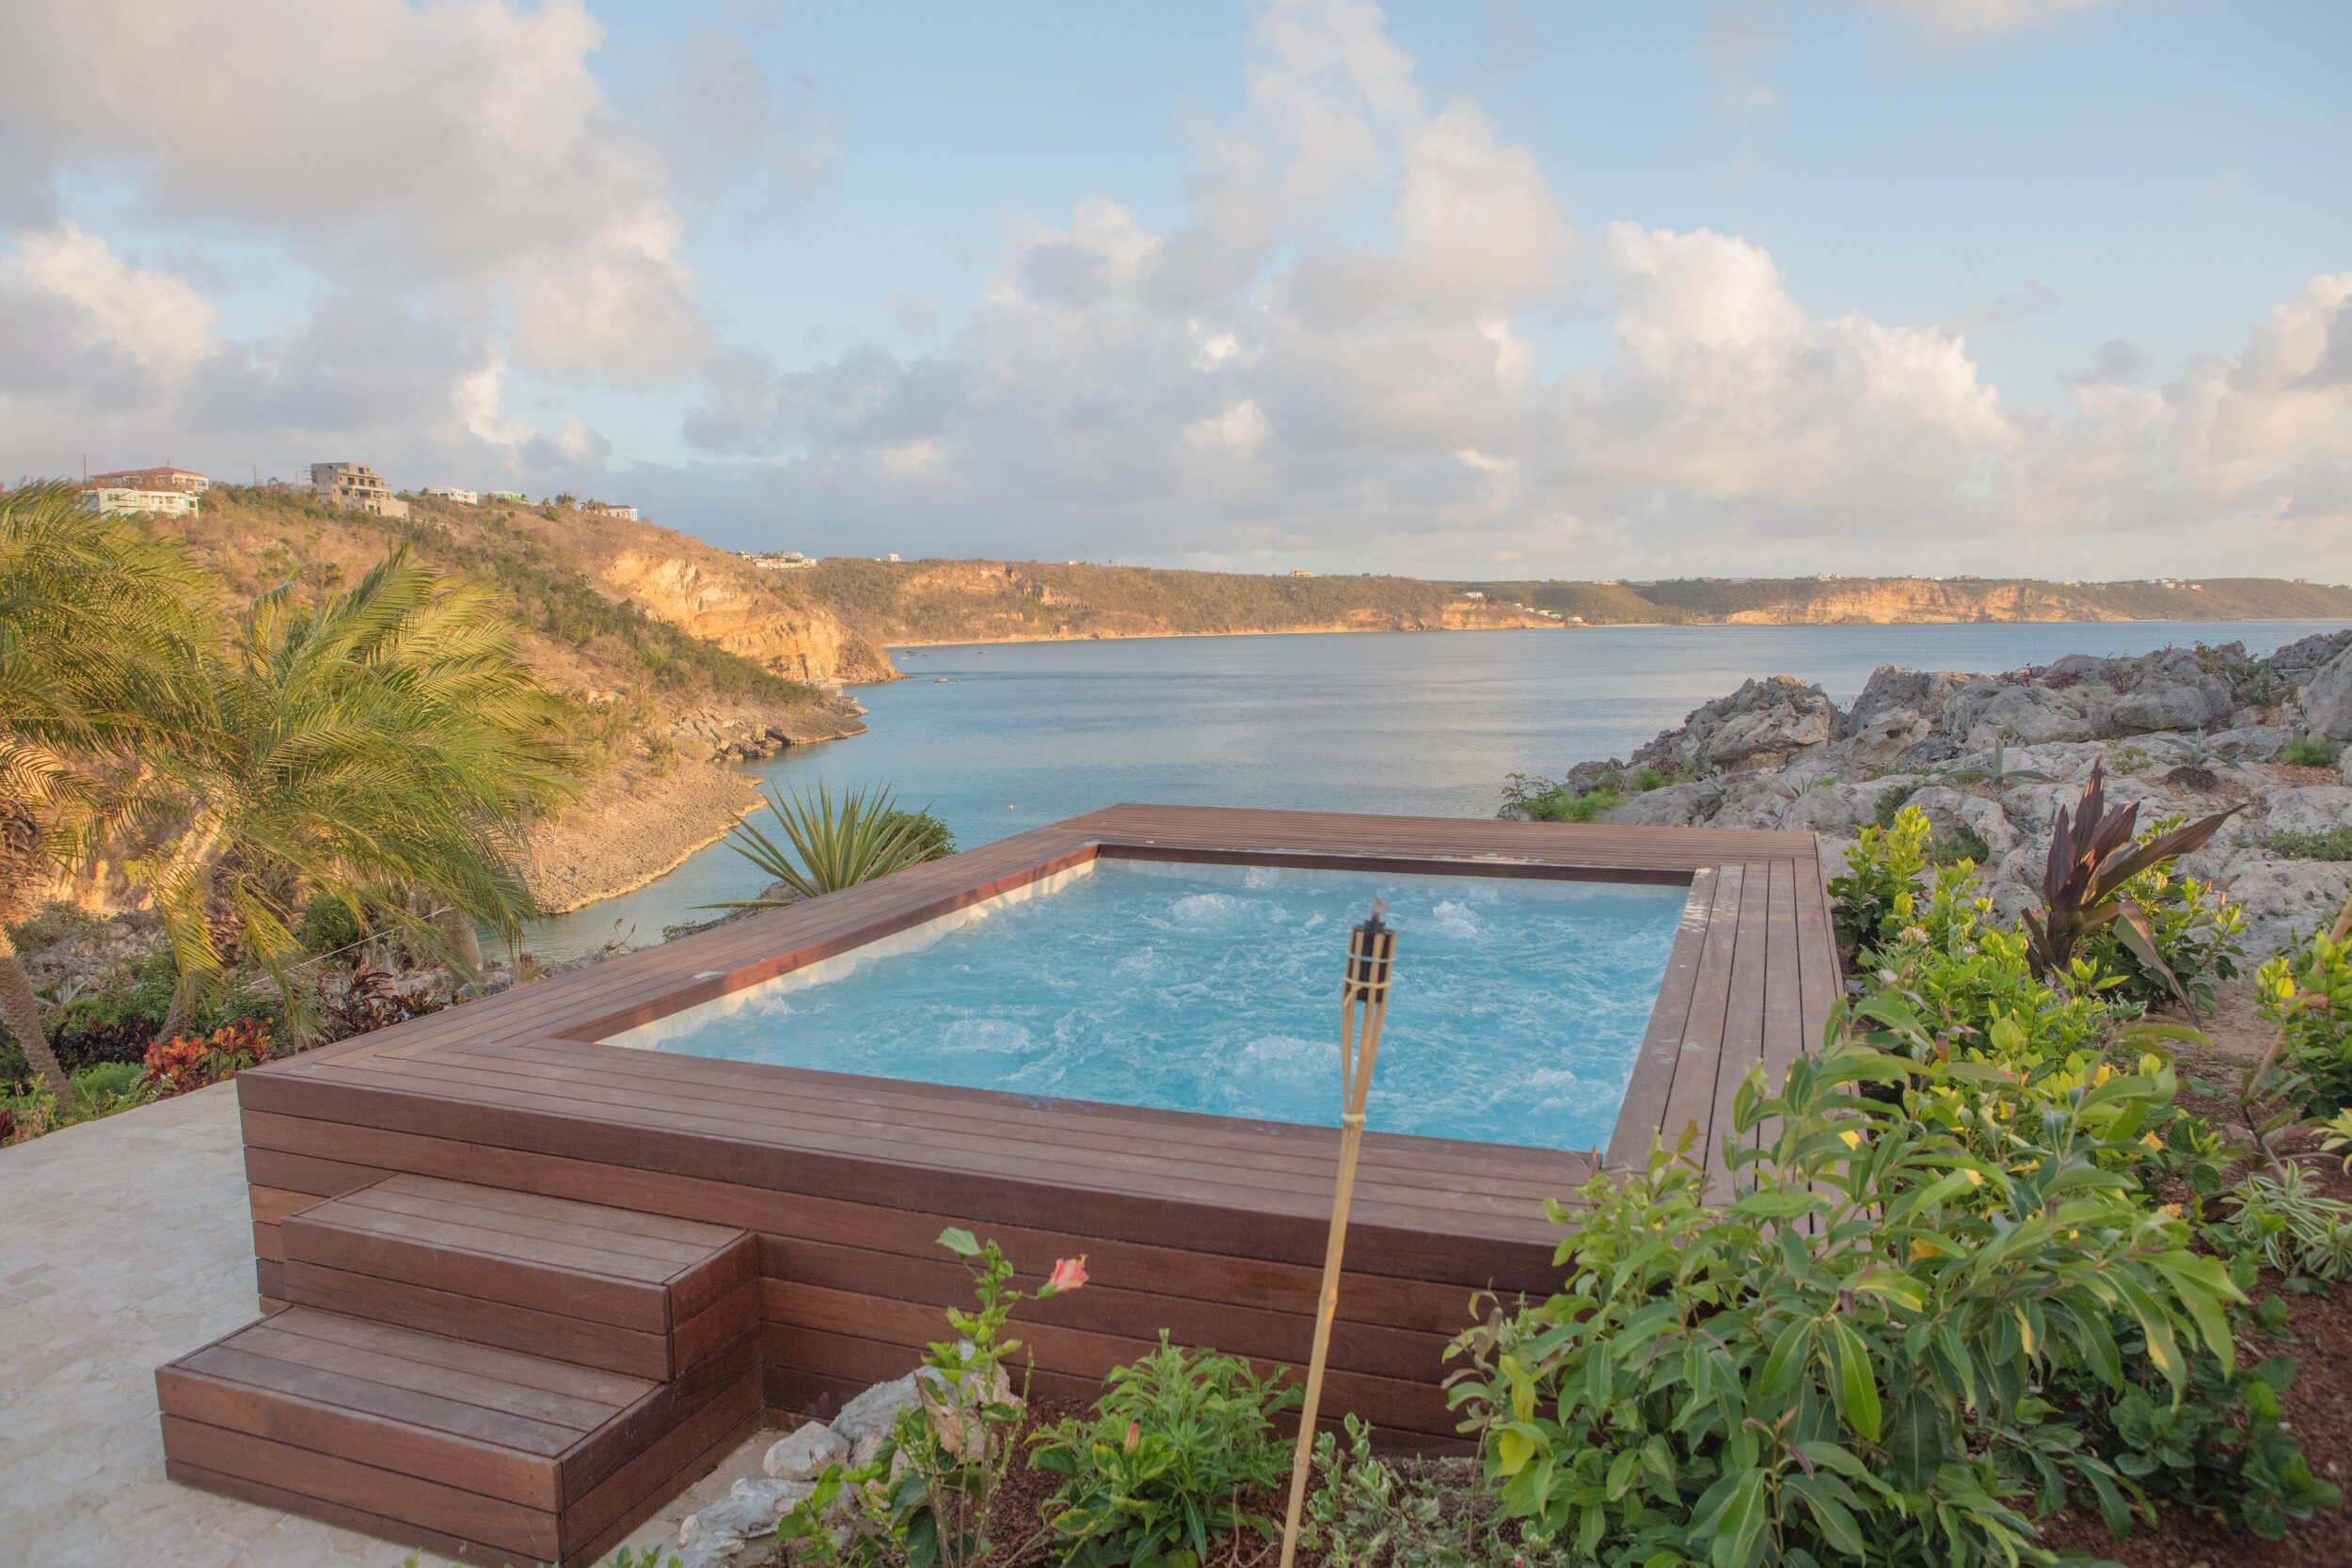   Views from the hot tub in the South Villa (photo credit: ÀNI Private Resorts)  